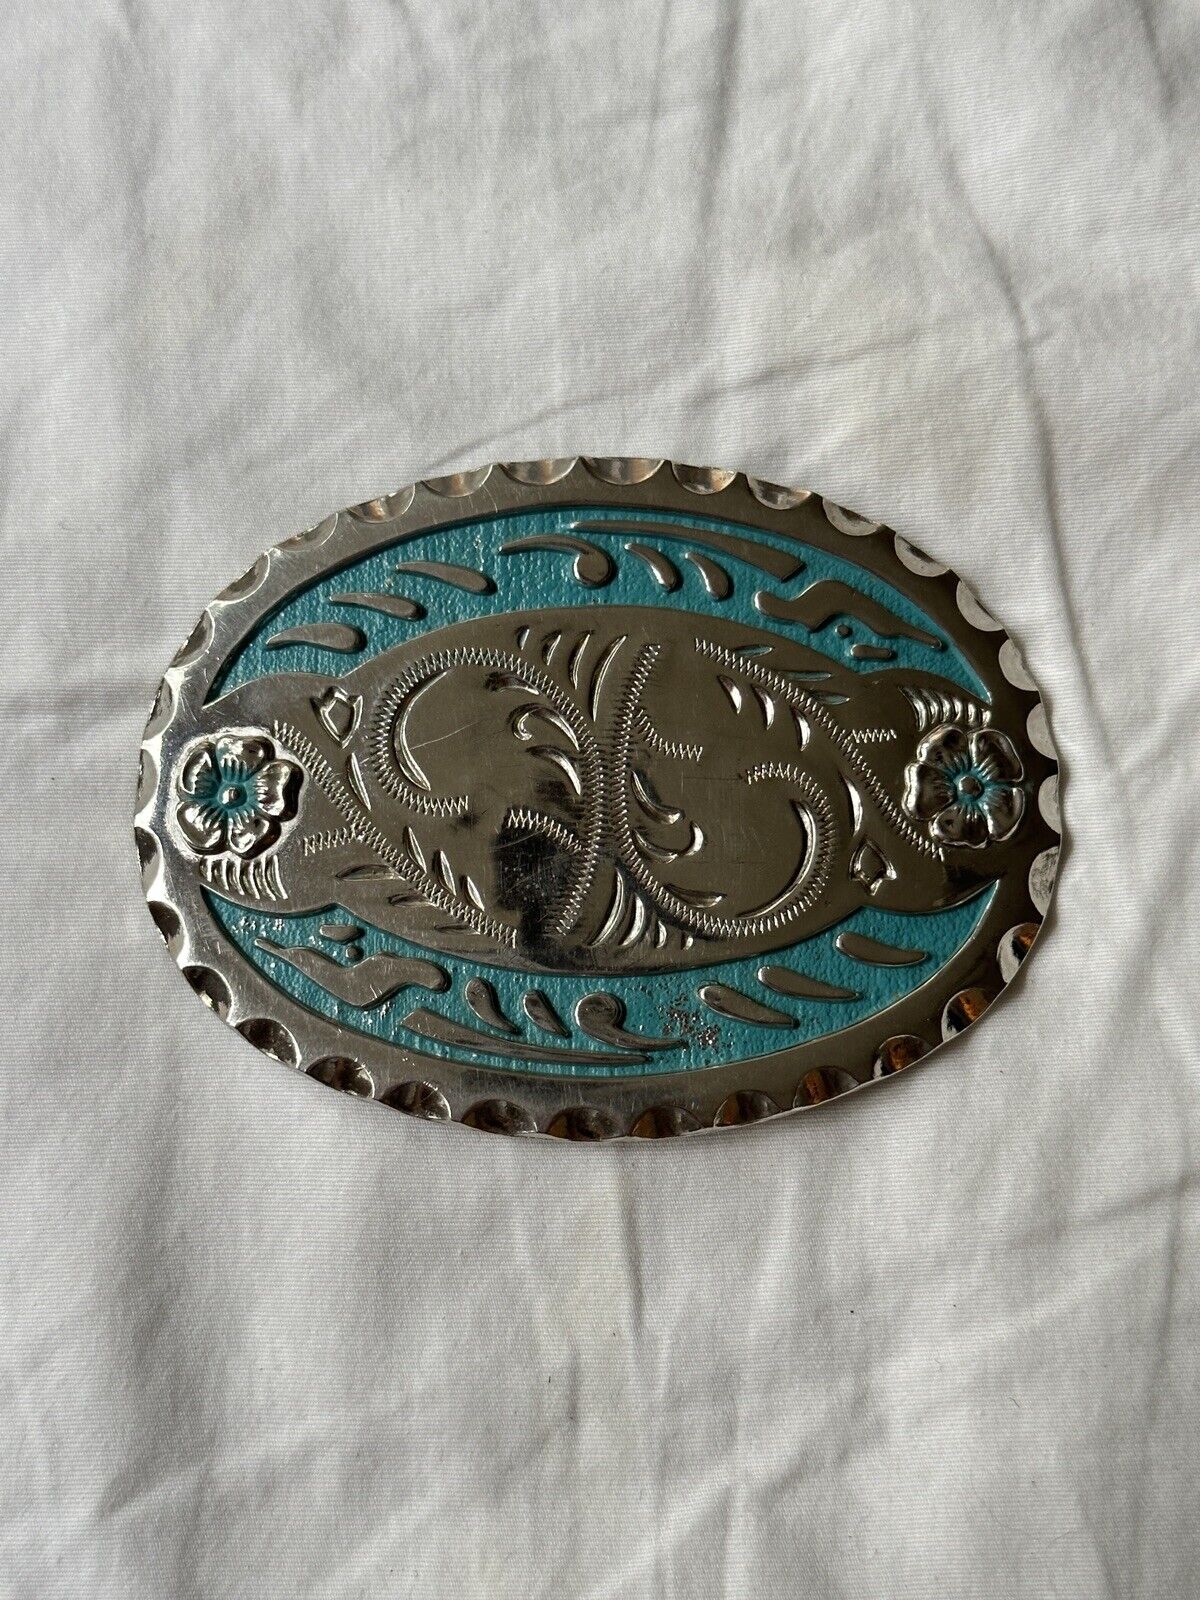 Vintage Chambers Belt Company Turquoise Floral Belt Buckle